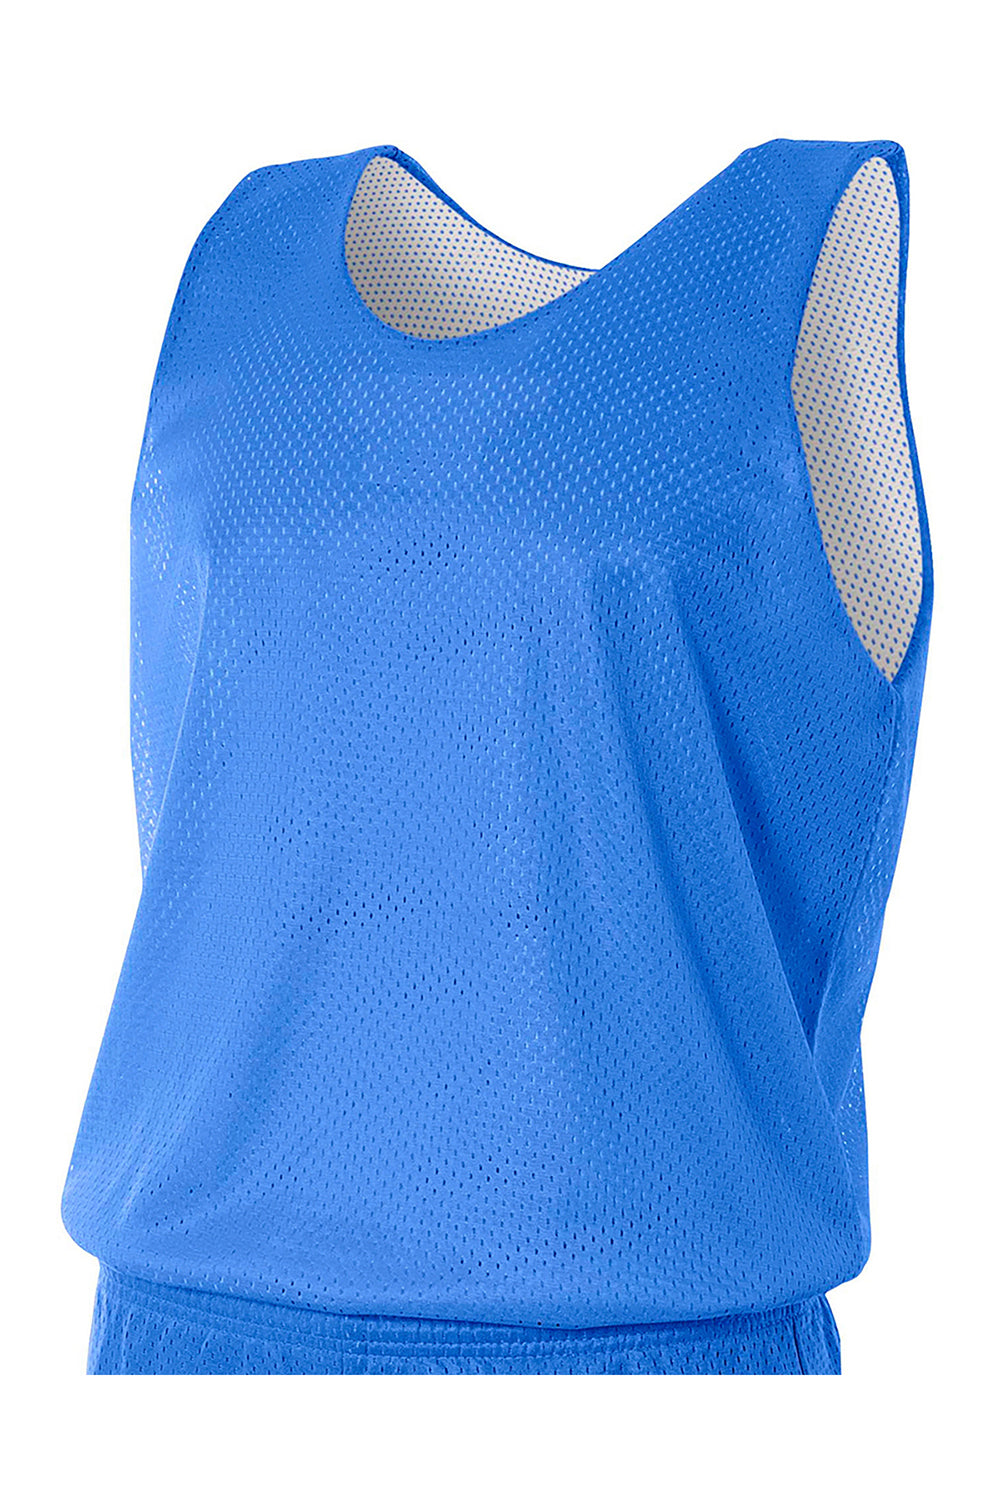 A4 NF1270 Mens Reversible Mesh Moisture Wicking Tank Top Royal Blue Flat Front